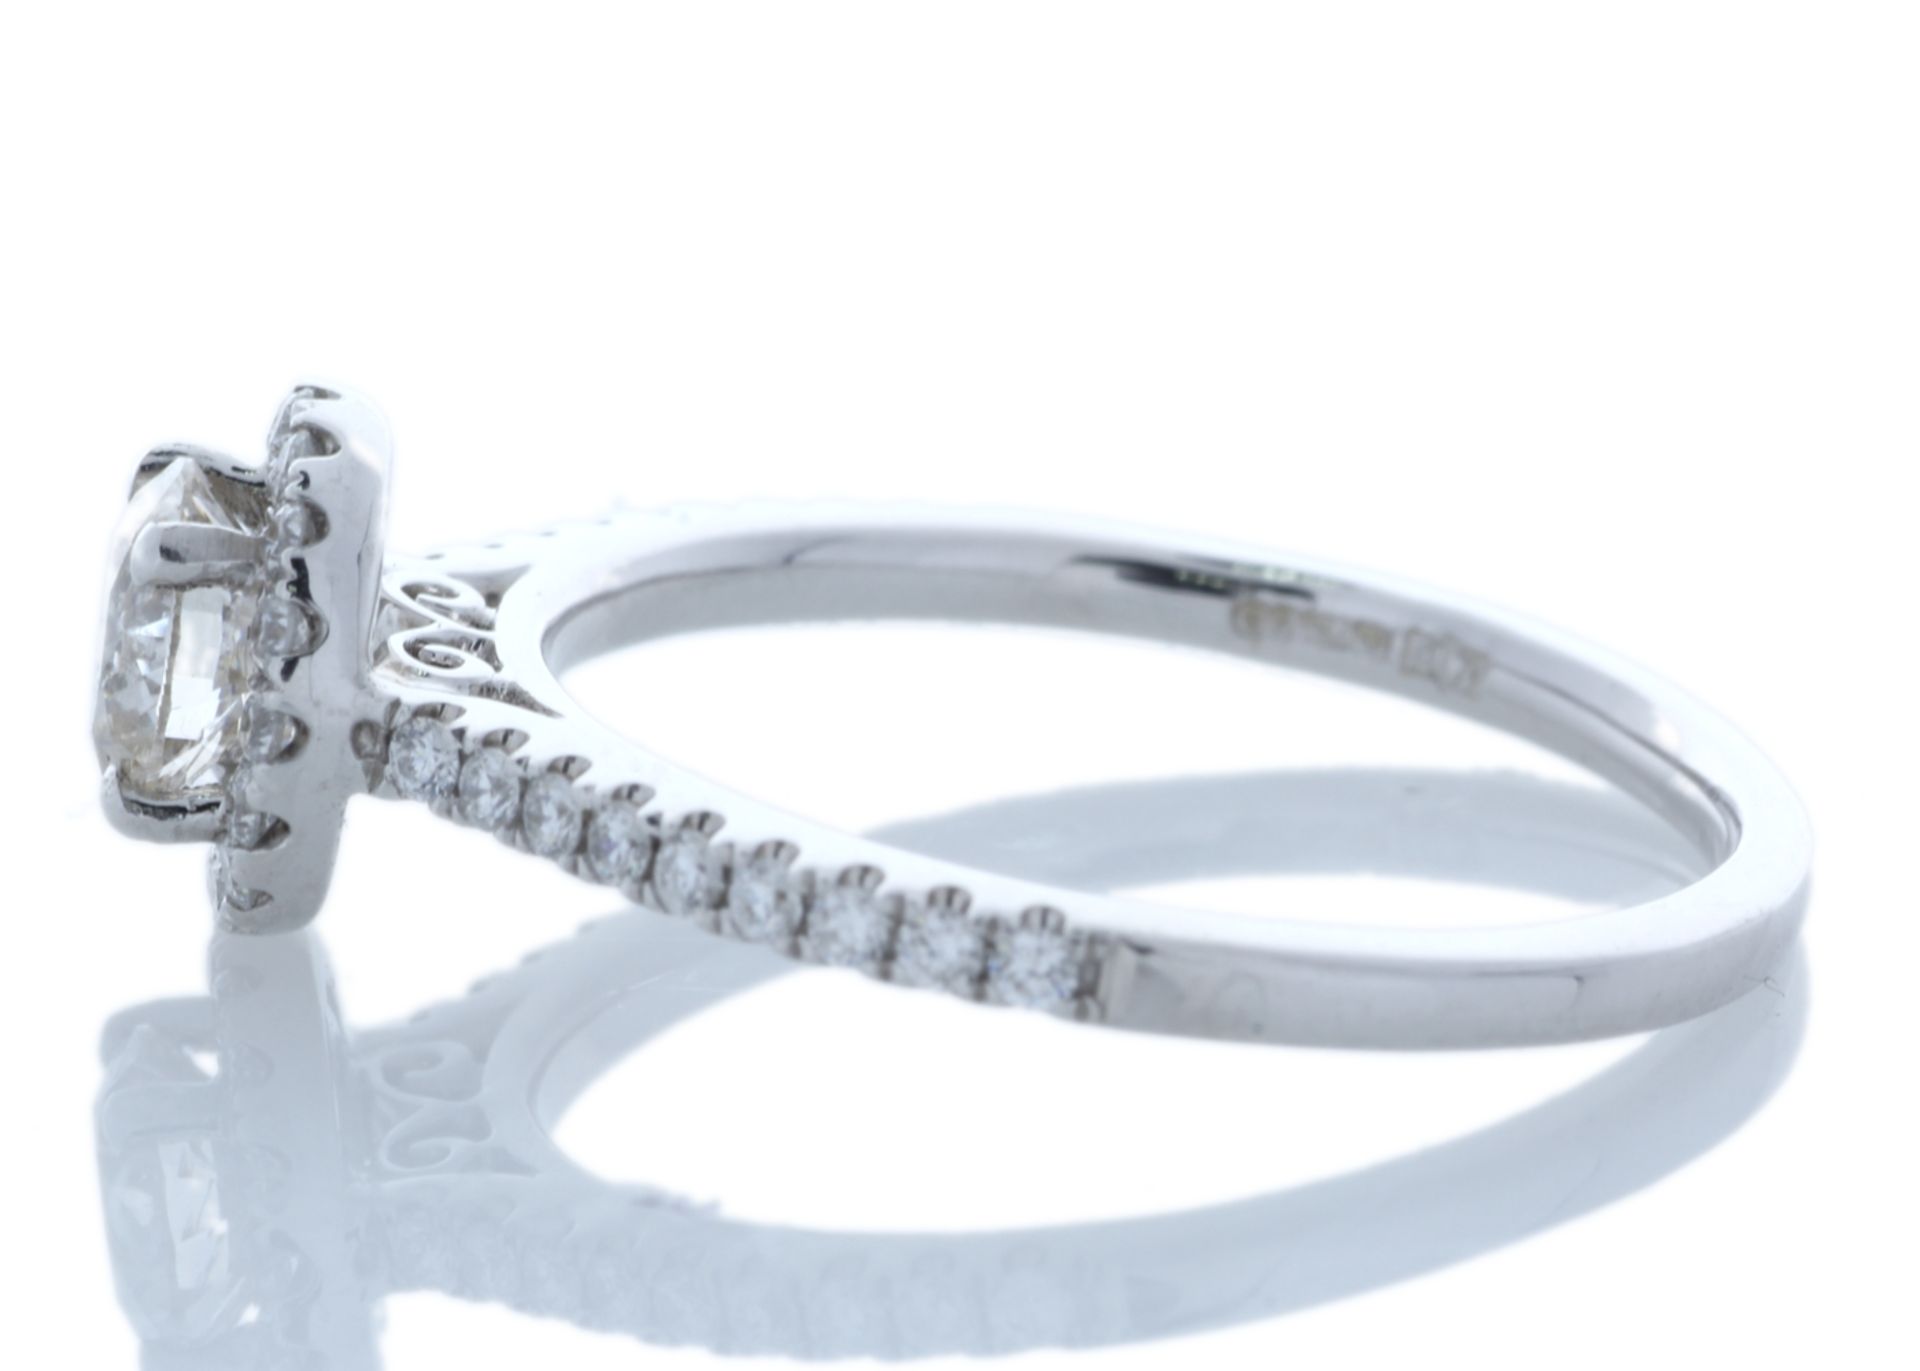 18ct White Gold Single Stone With Halo Setting Ring (0.51) 0.74 Carats - Valued by AGI £3,630.00 - - Image 2 of 4